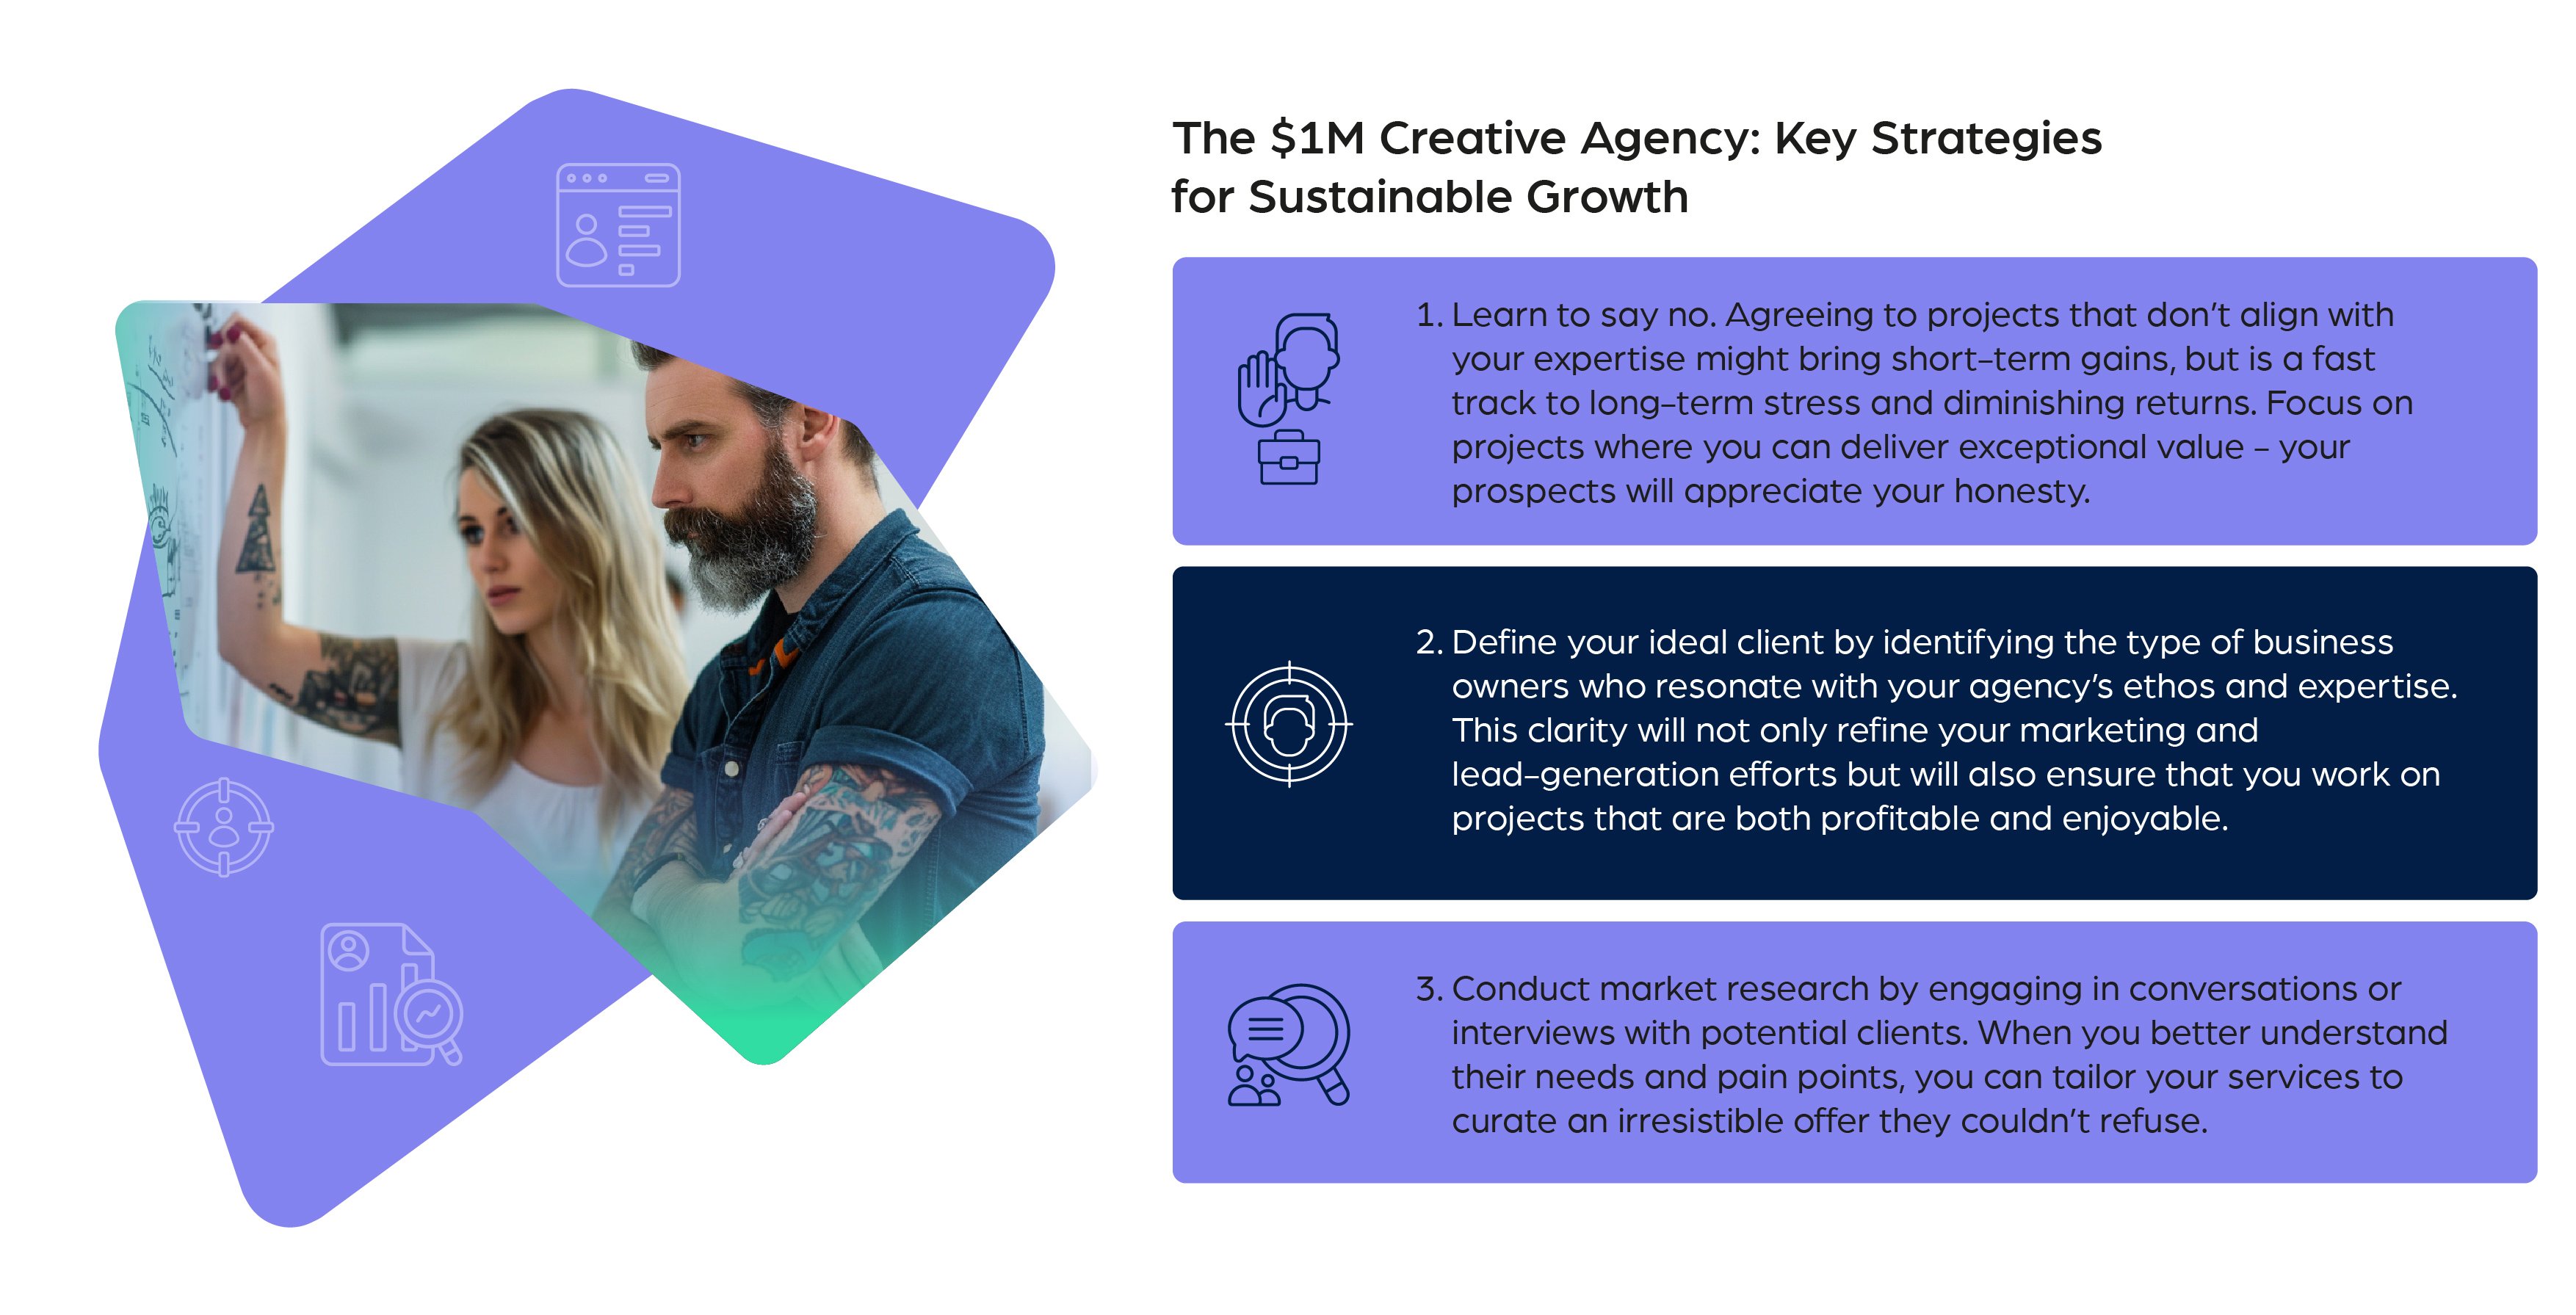 The $1M Creative Agency: Key Strategies for Sustainable Growth